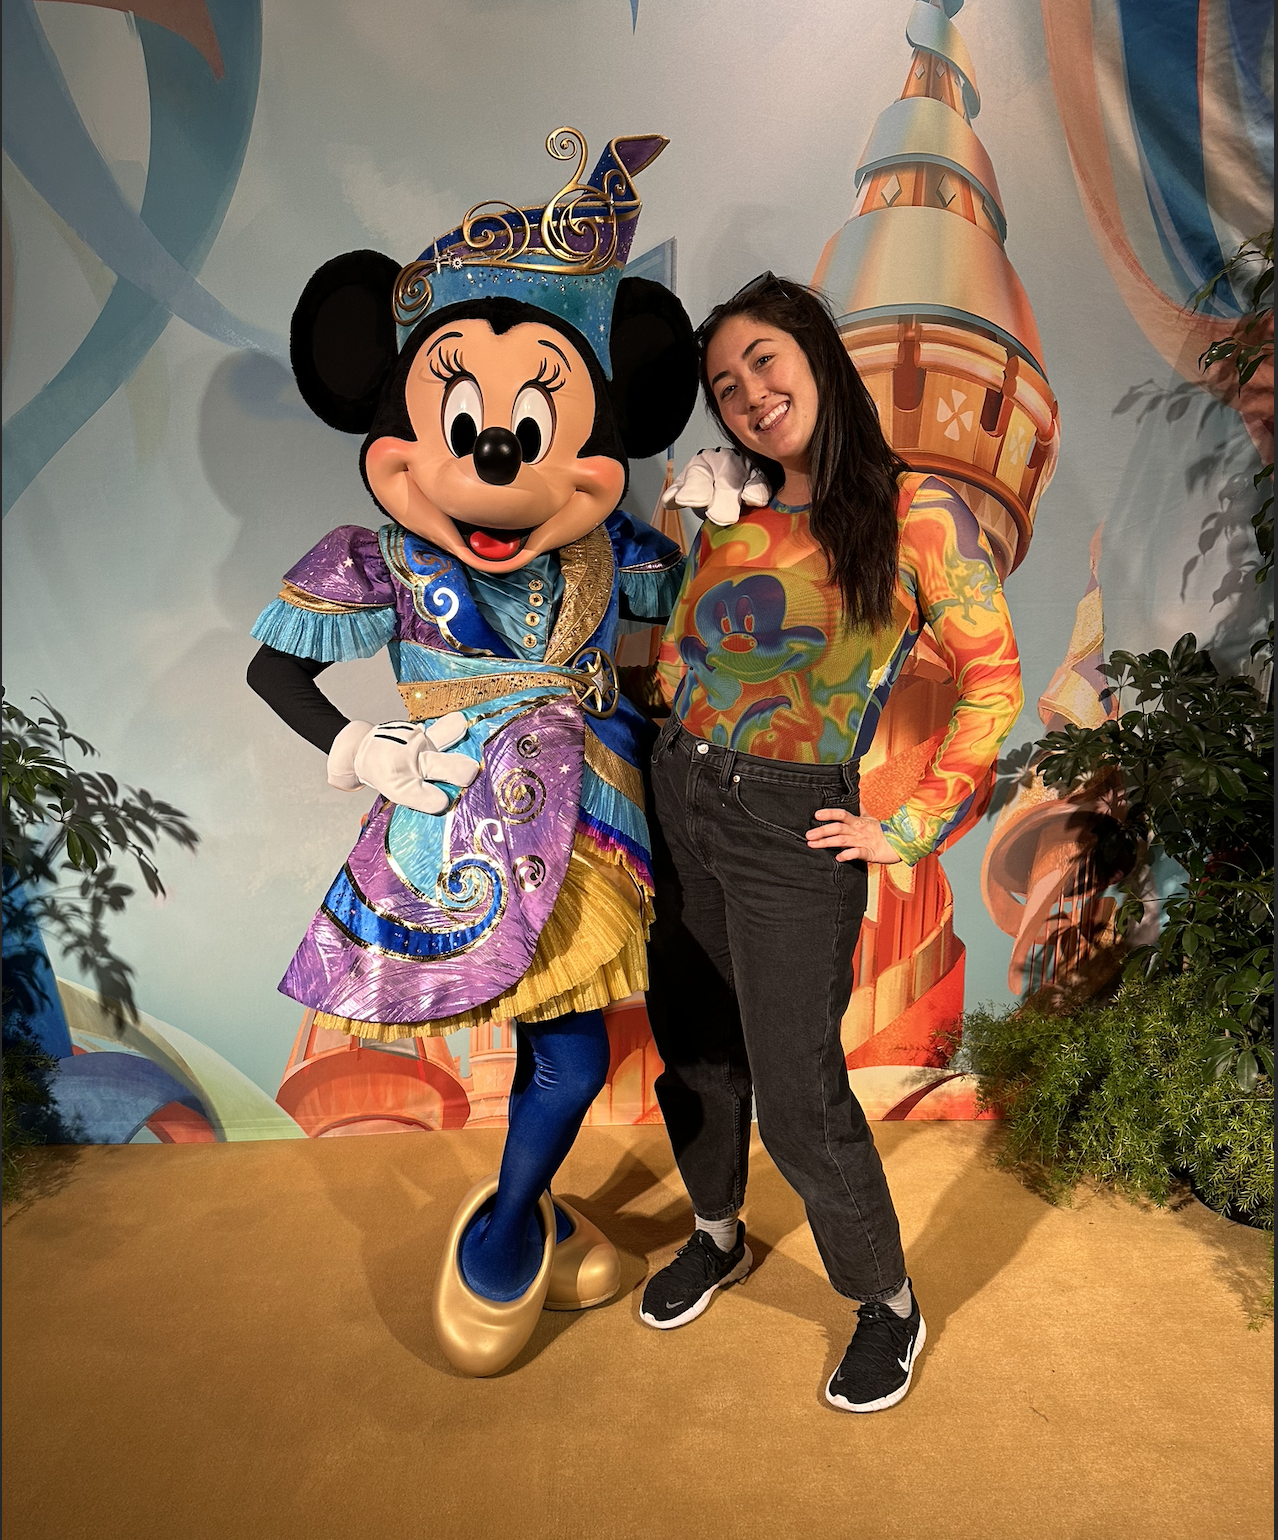 The writer posing with Minnie Mouse